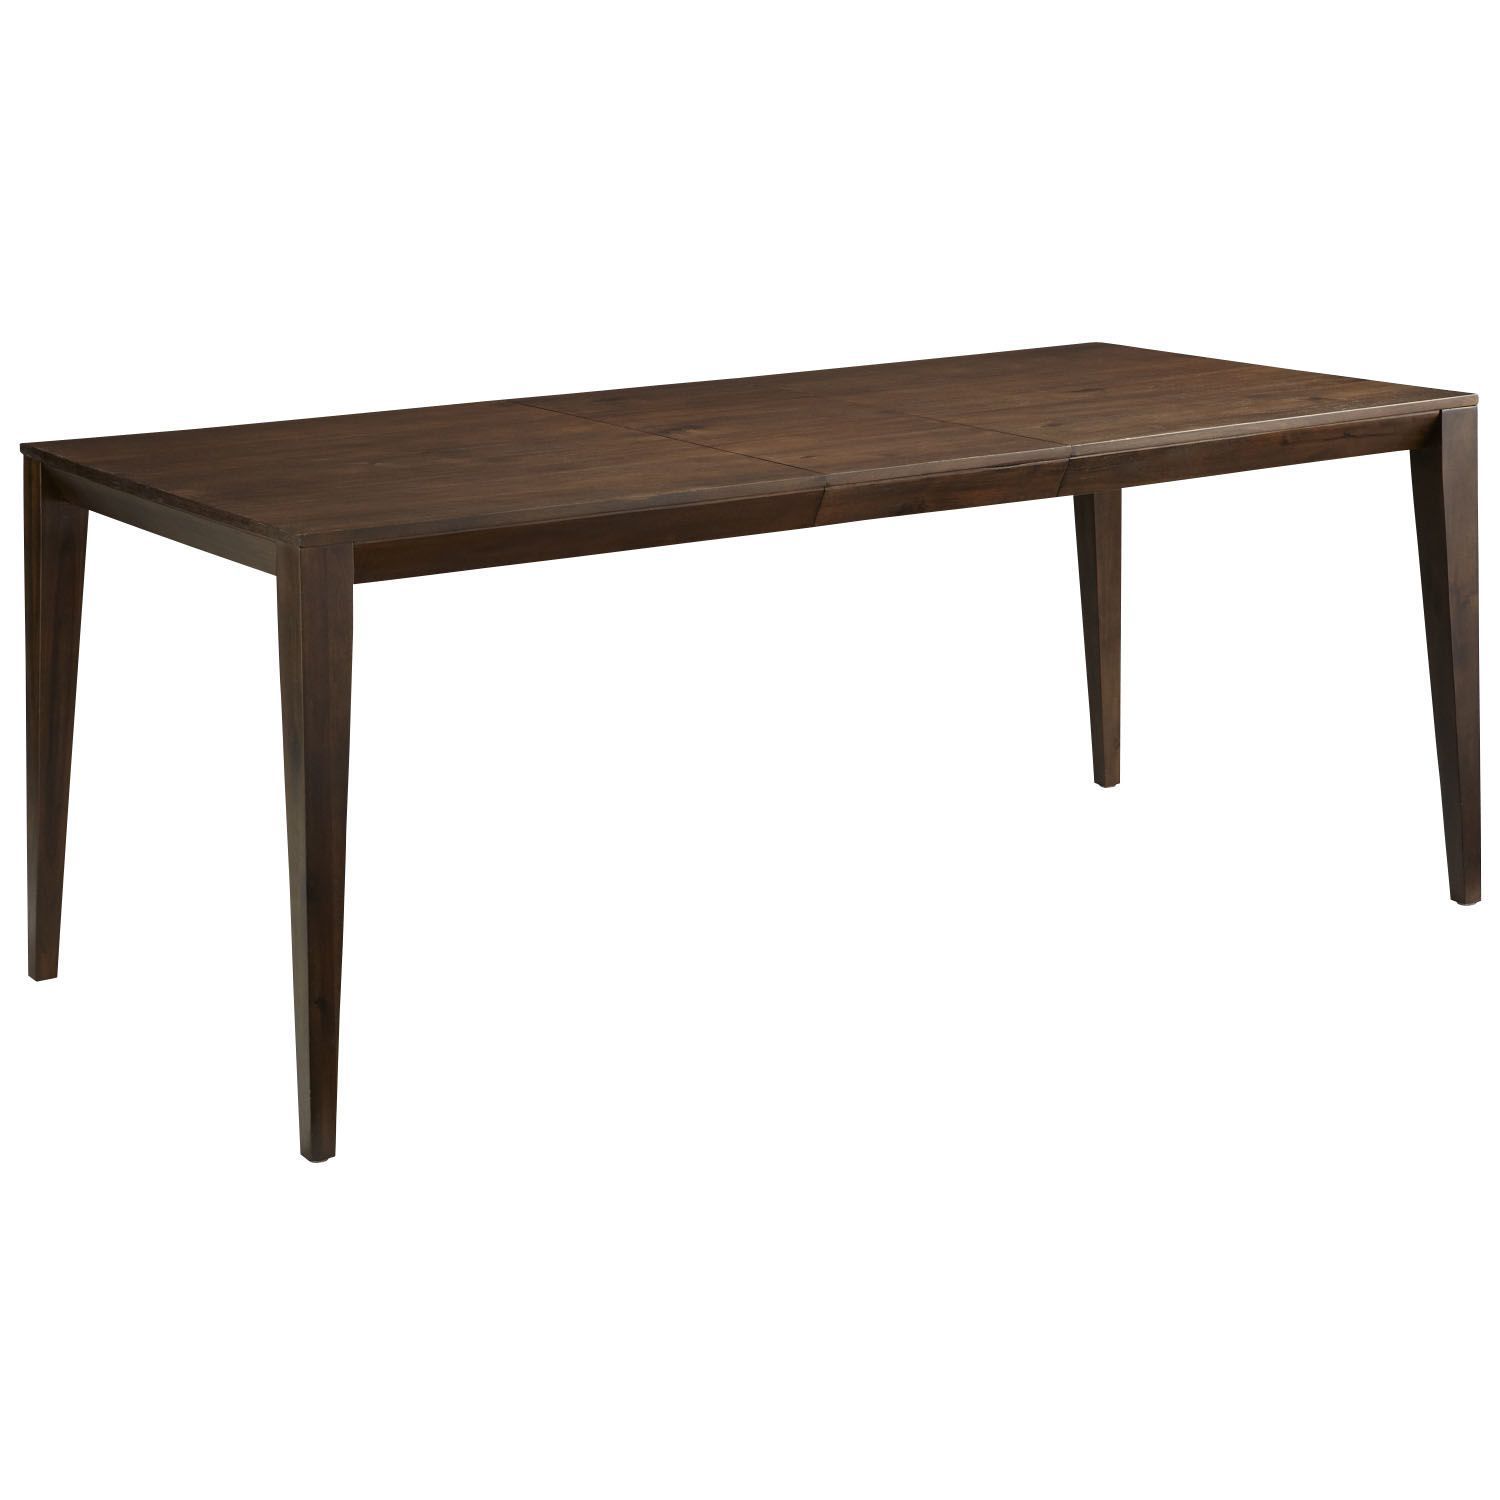 Dylan Extension Dining Table – Walnut Walnut Brown Without In Newest Alfresco Brown Benchwright Extending Dining Tables (View 16 of 25)